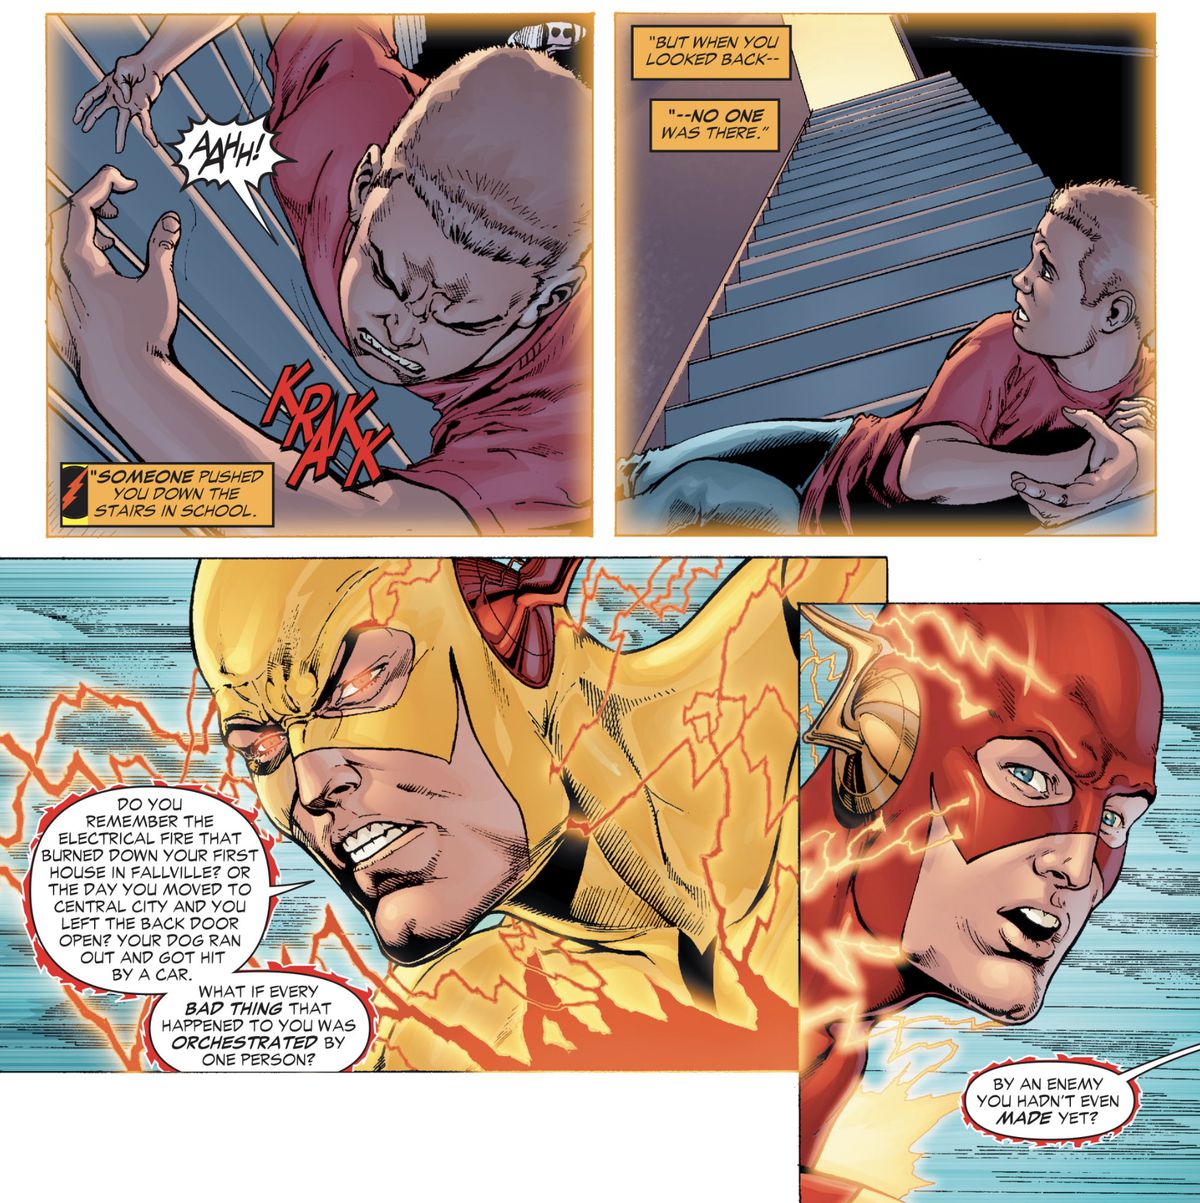 Reverse Flash explains to Barry Allen that he is responsible for the time he fell down a flight of stairs at school and broke his arm, and the time his house burned down and his dog ran away in The Flash: Rebirth. 